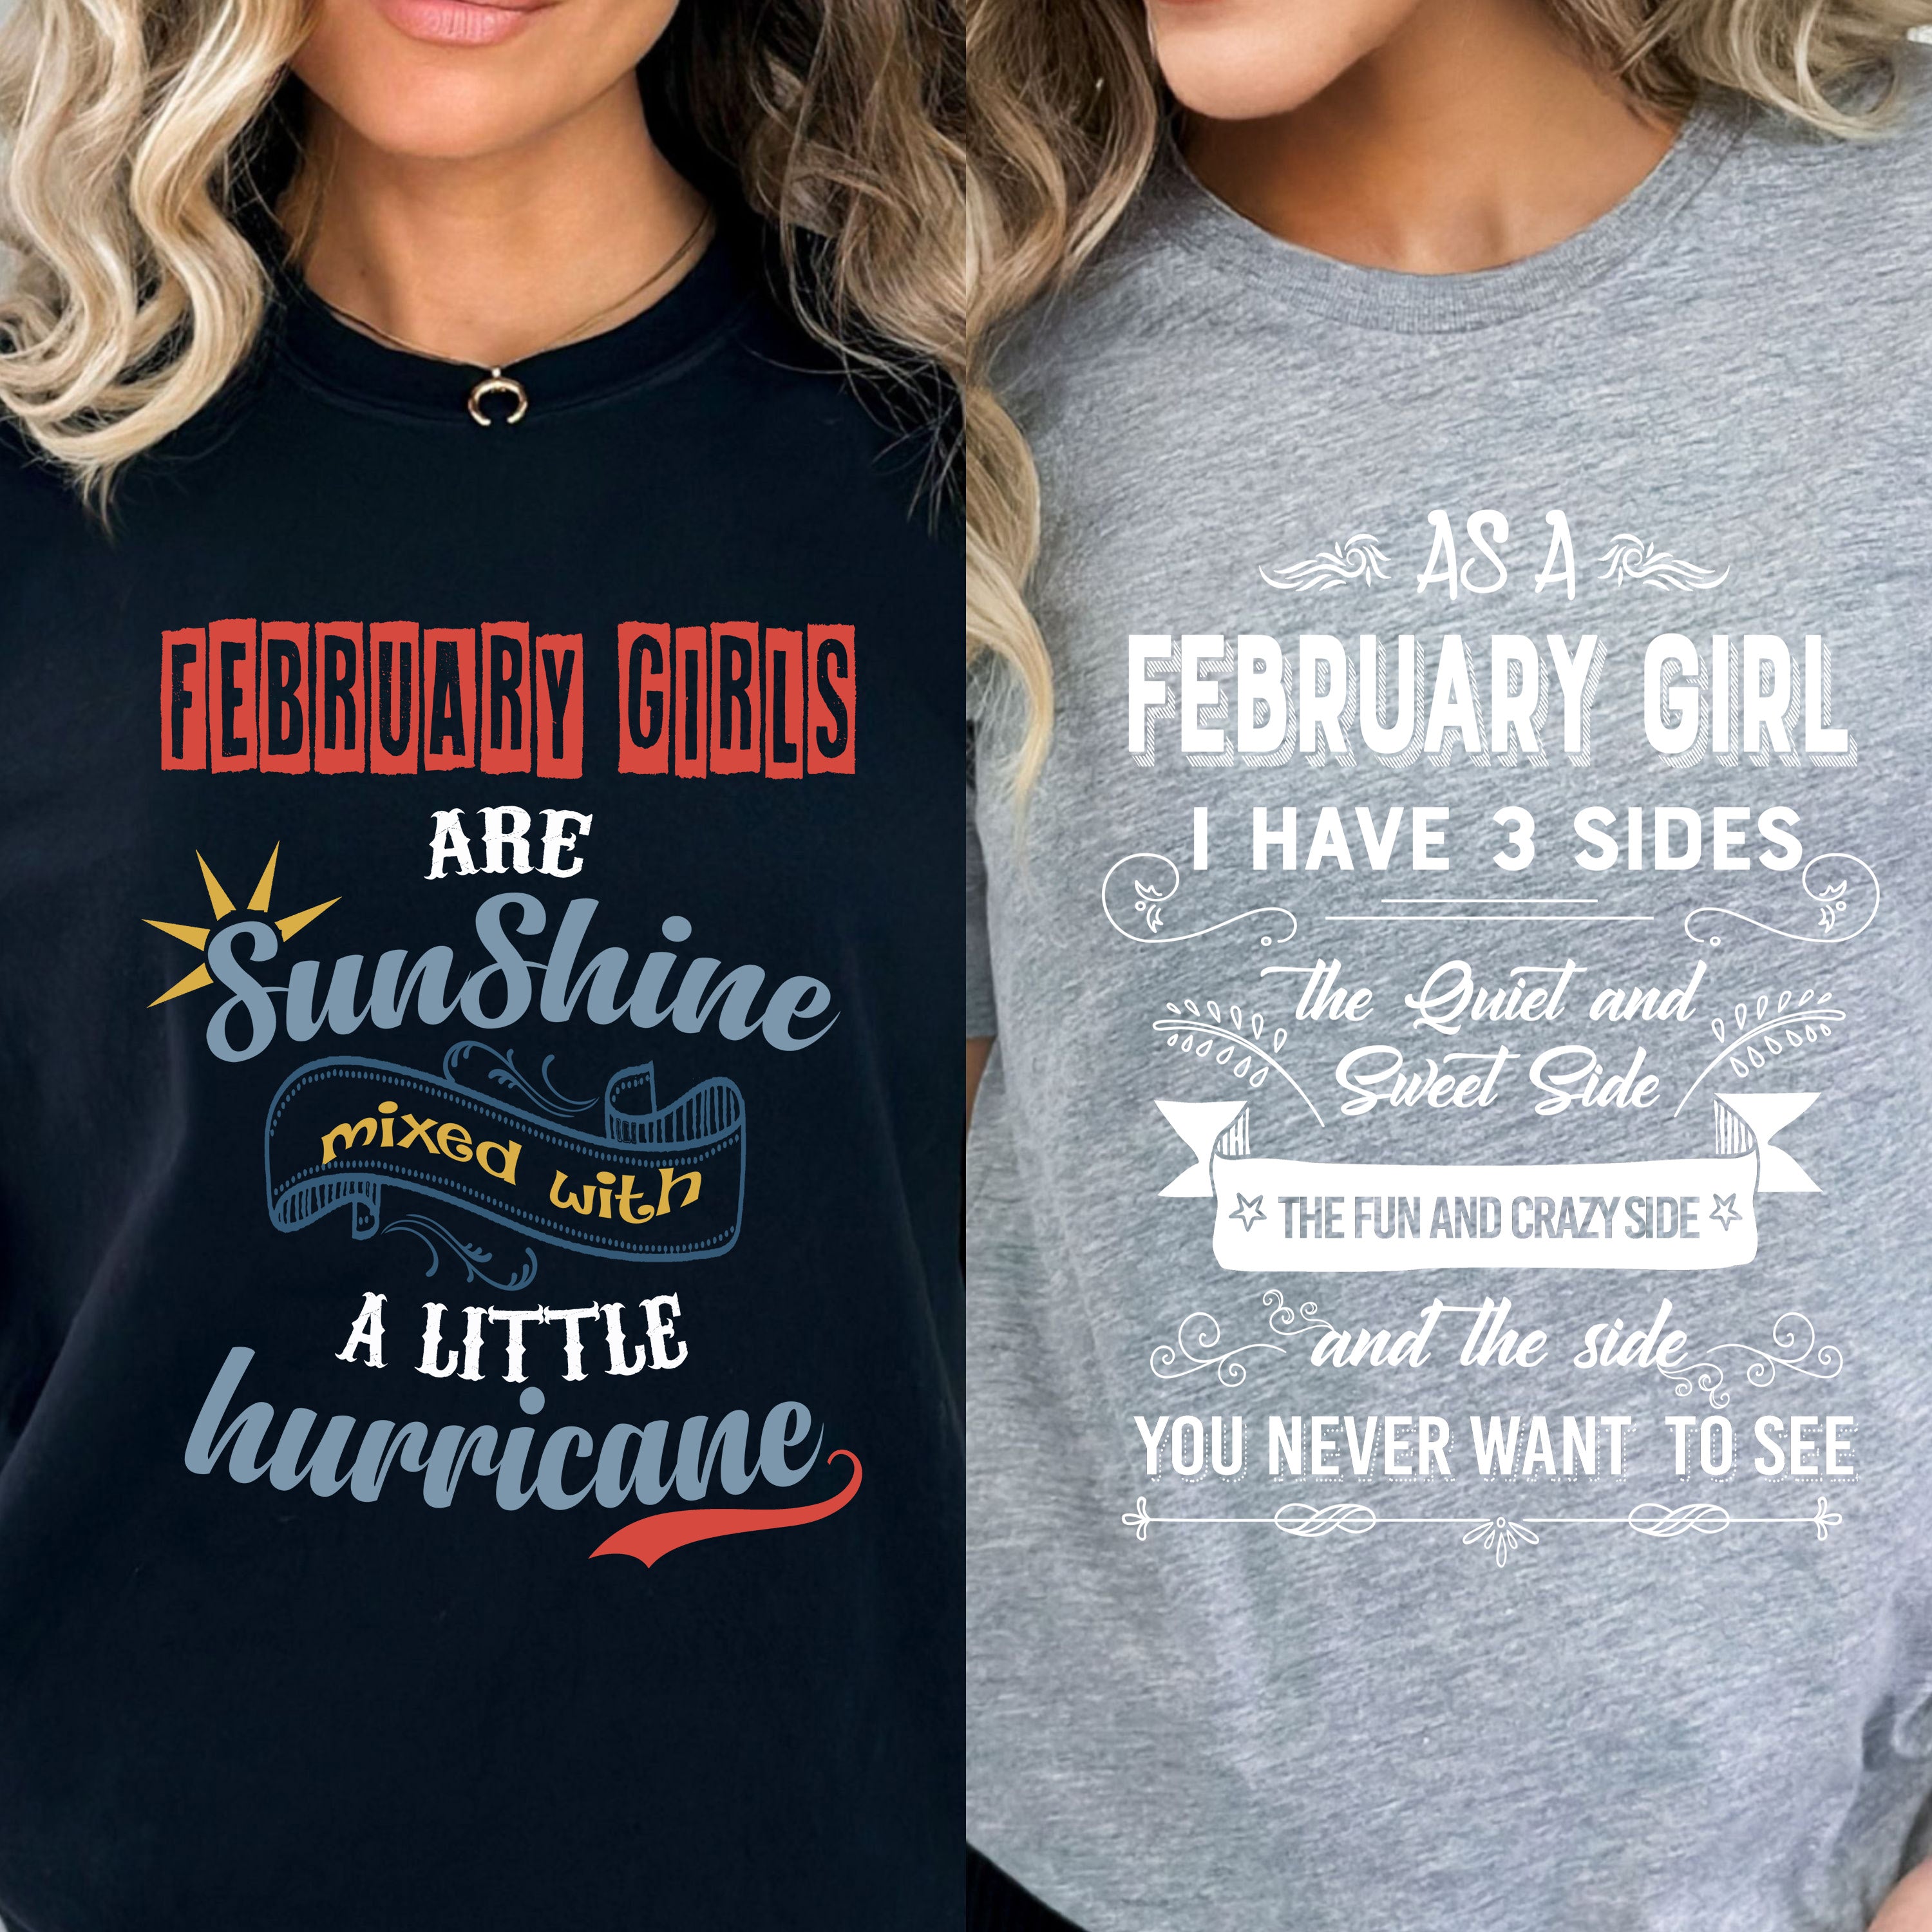 "2 Awesome Designs Combo- February Sunshine + 3 Sides" in Latest Colors.